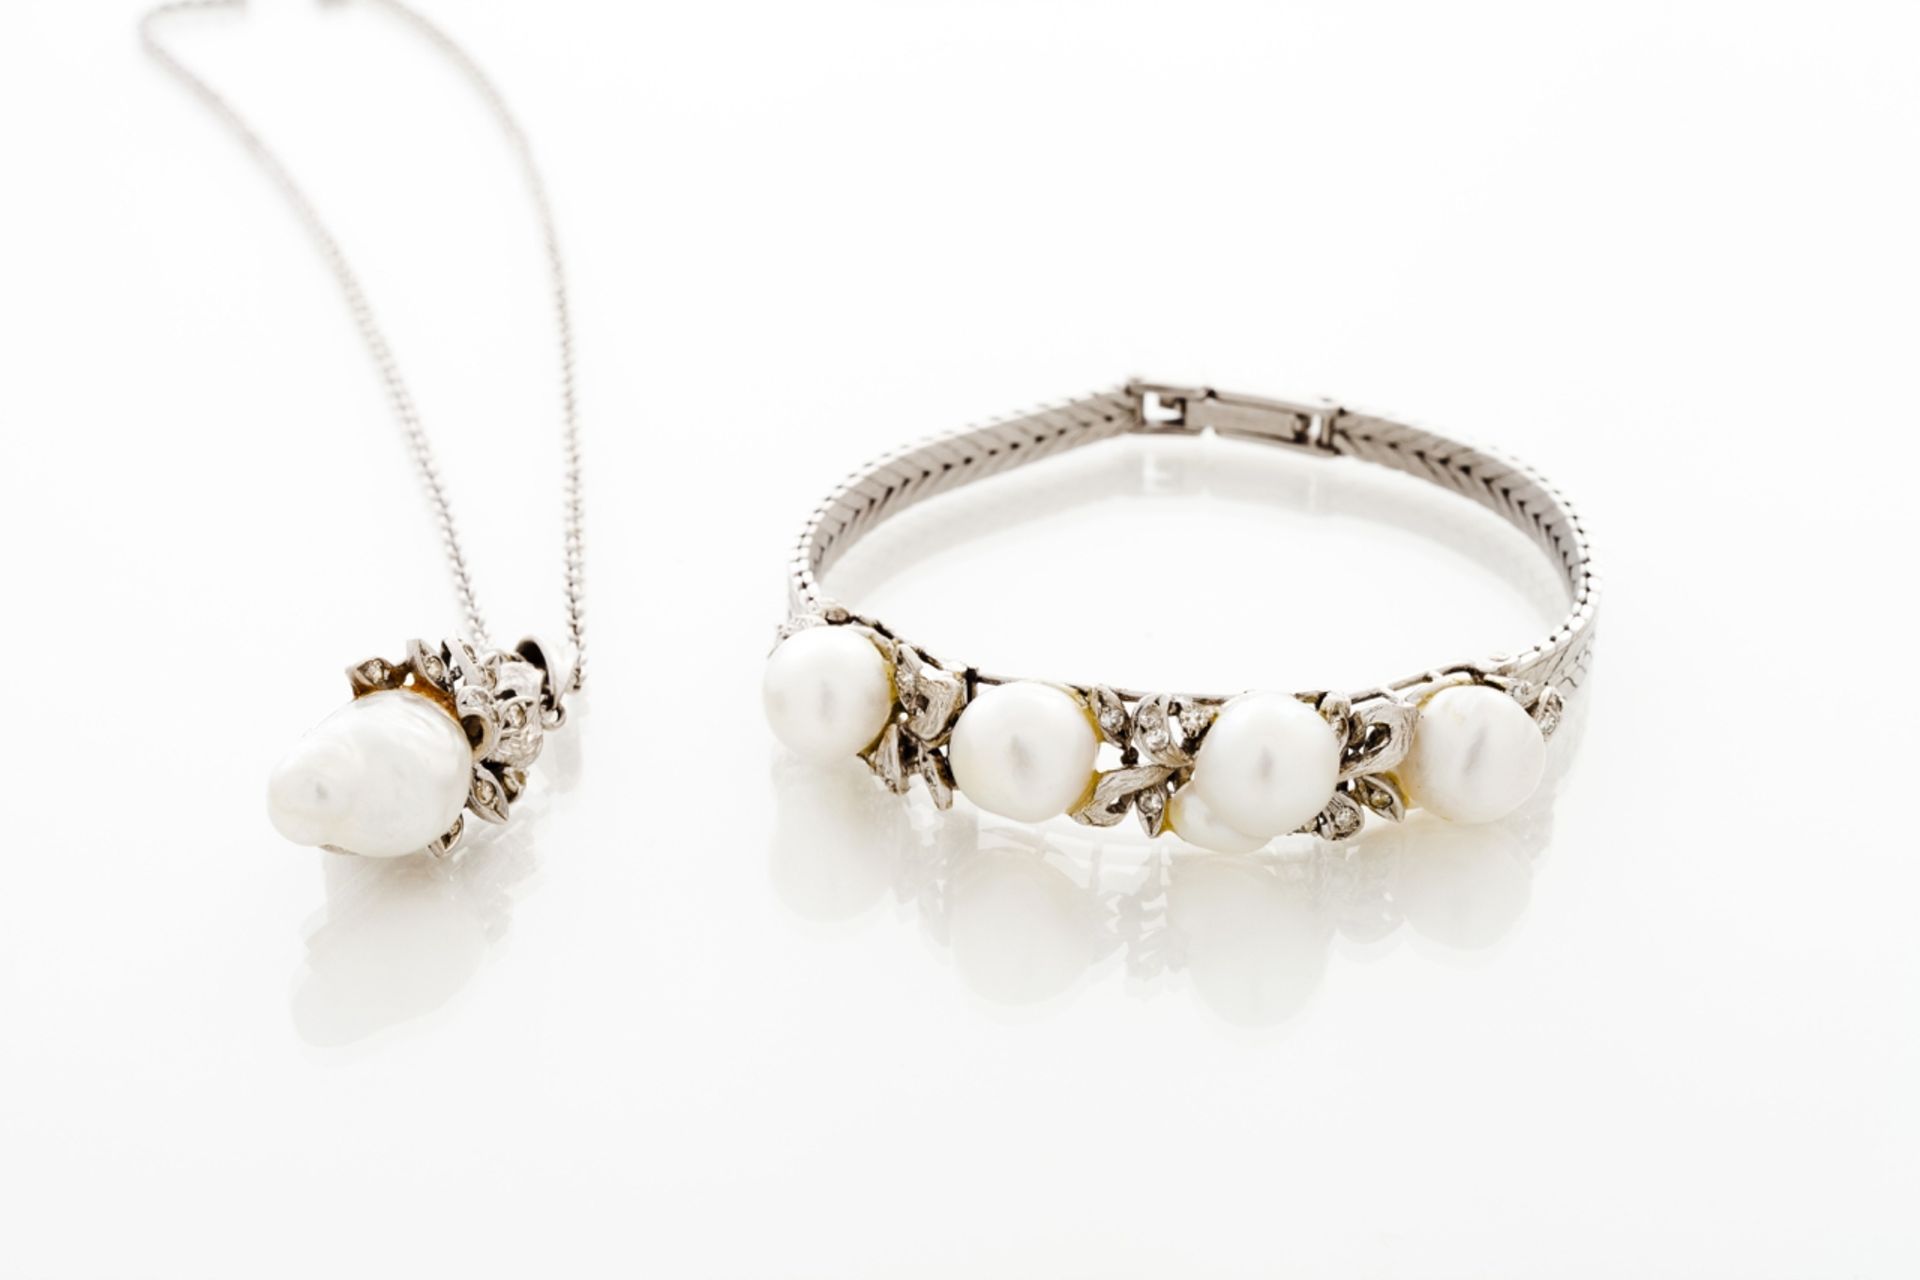 A cultured pearl and diamond bracelet  Set in 18kt gold with small single cut diamonds and four